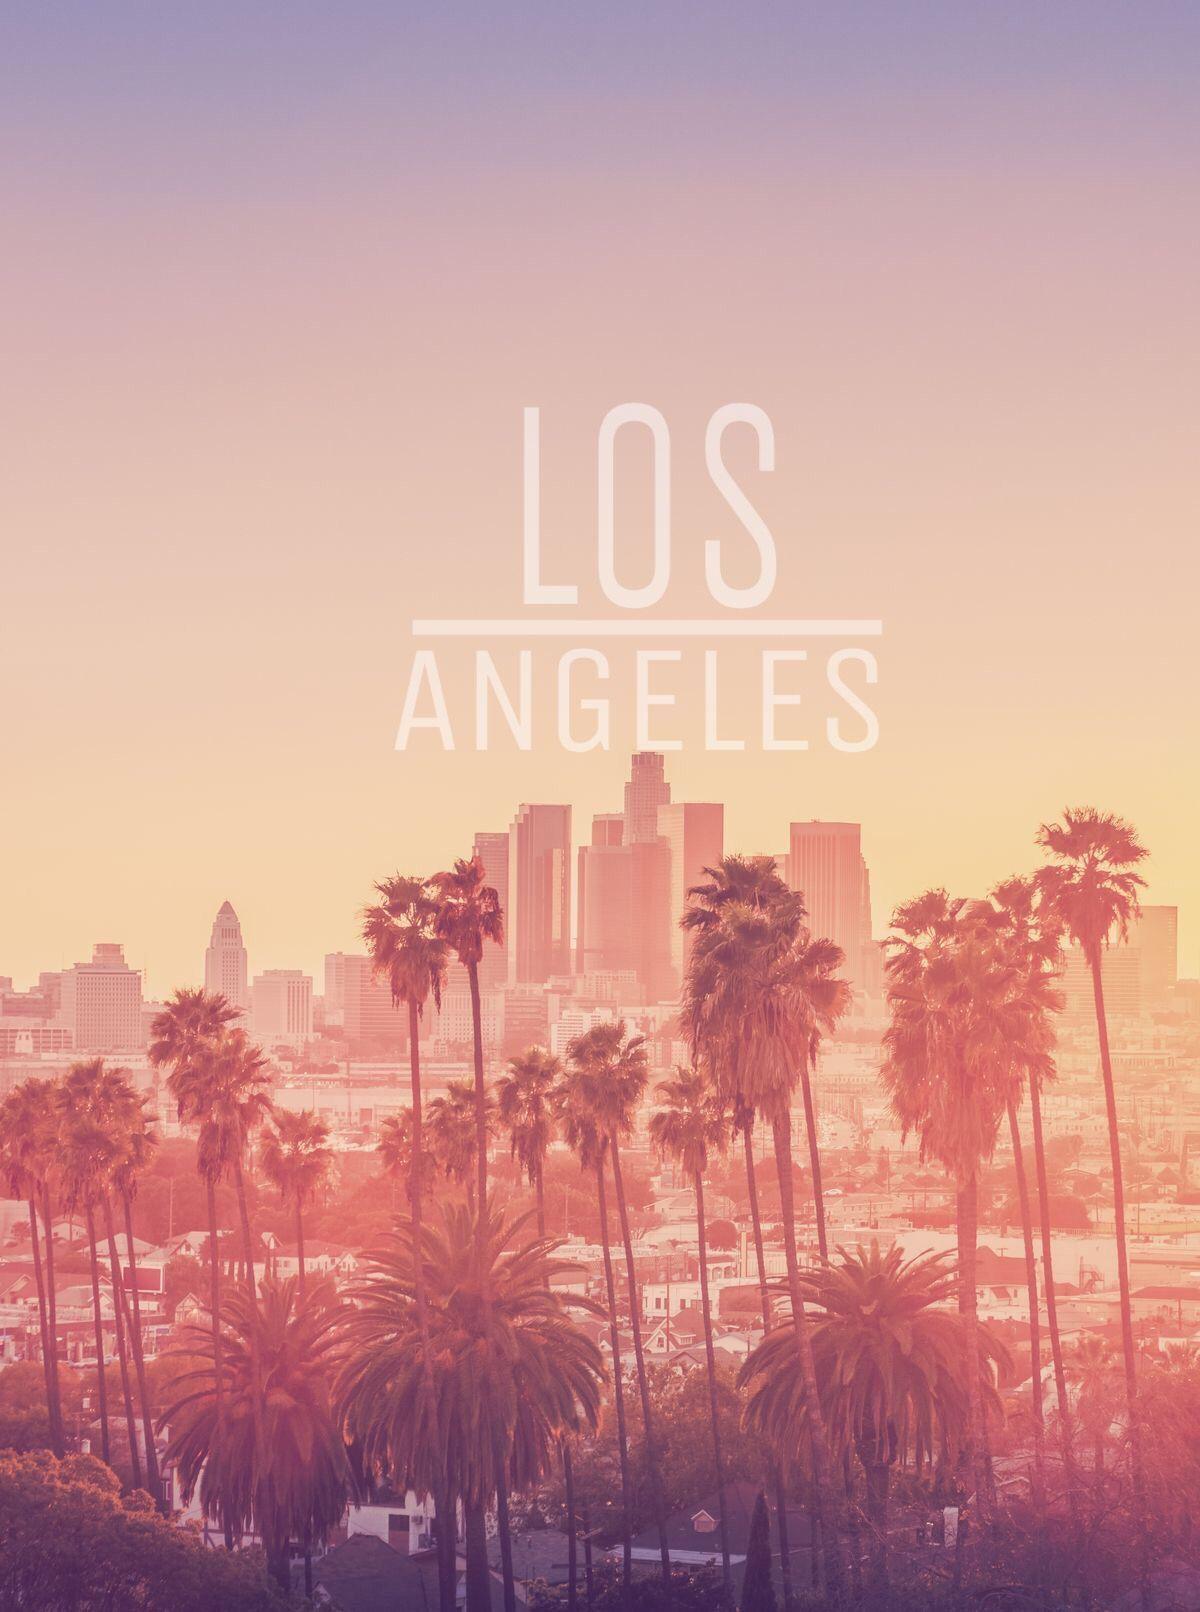 A city skyline with palm trees in the foreground and the word Los Angeles written in white - Los Angeles, California